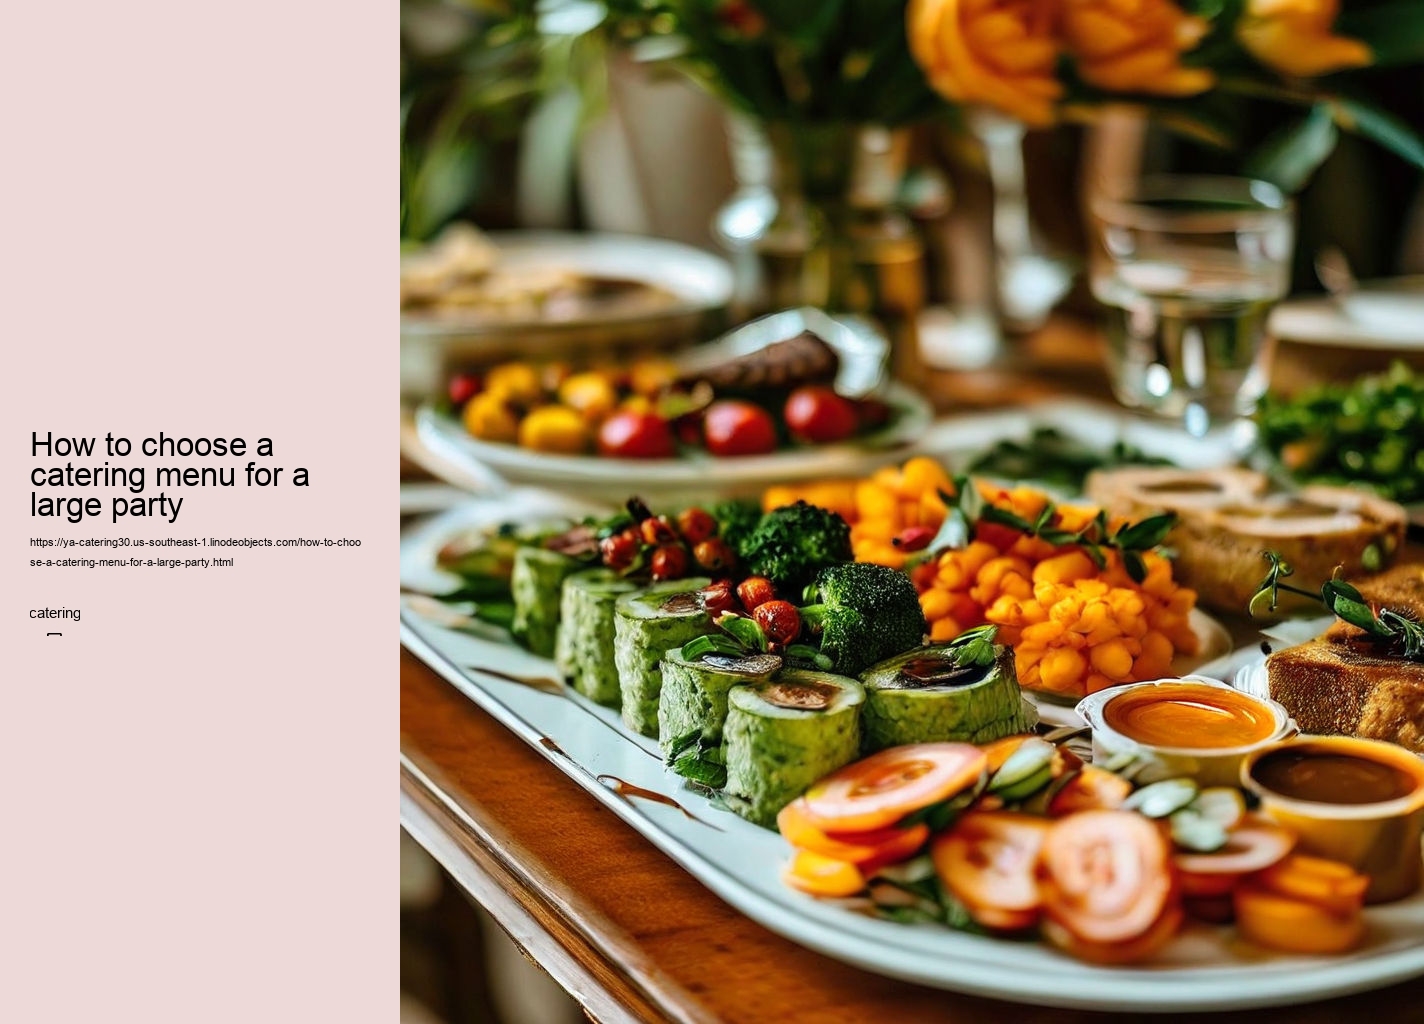 How to choose a catering menu for a large party